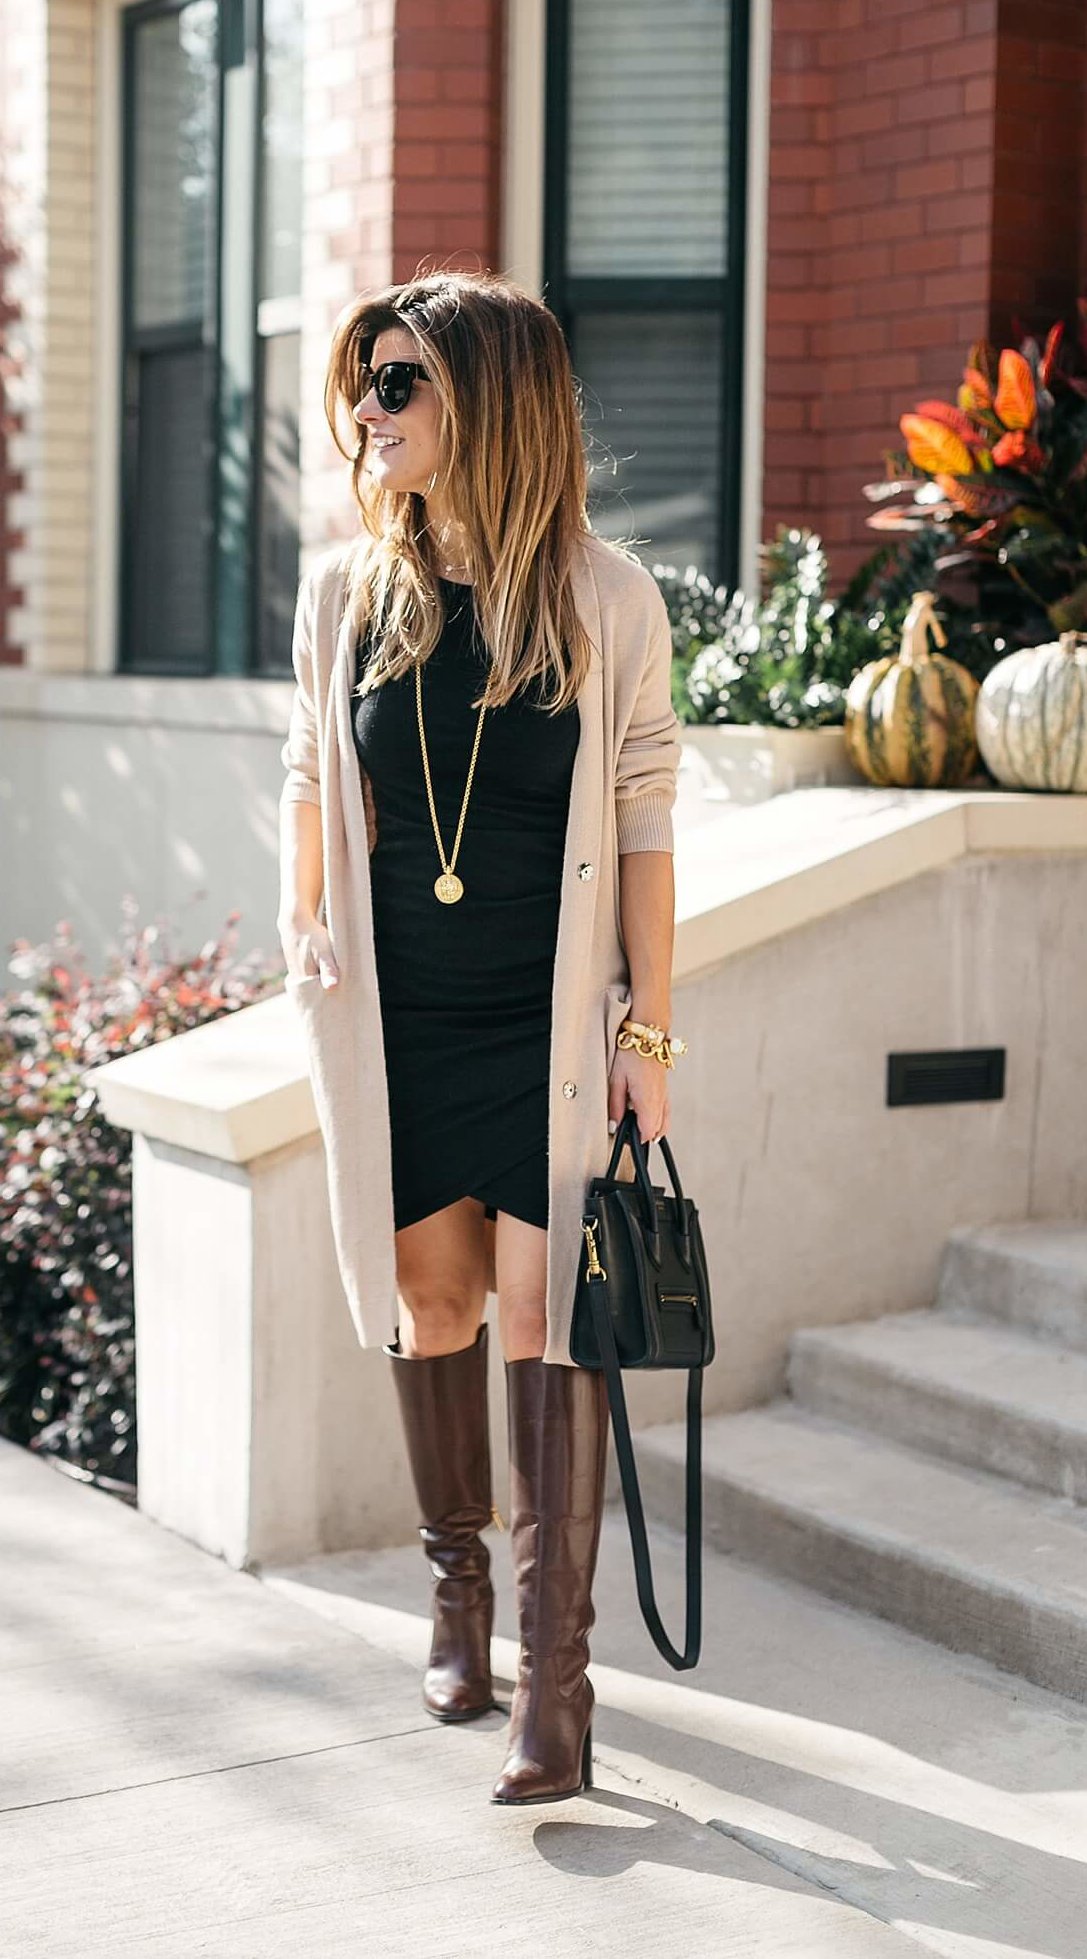 Leith ruched dress, camel cardigan, tall leather brown boots // fall outfit ideas // fall date night ideas